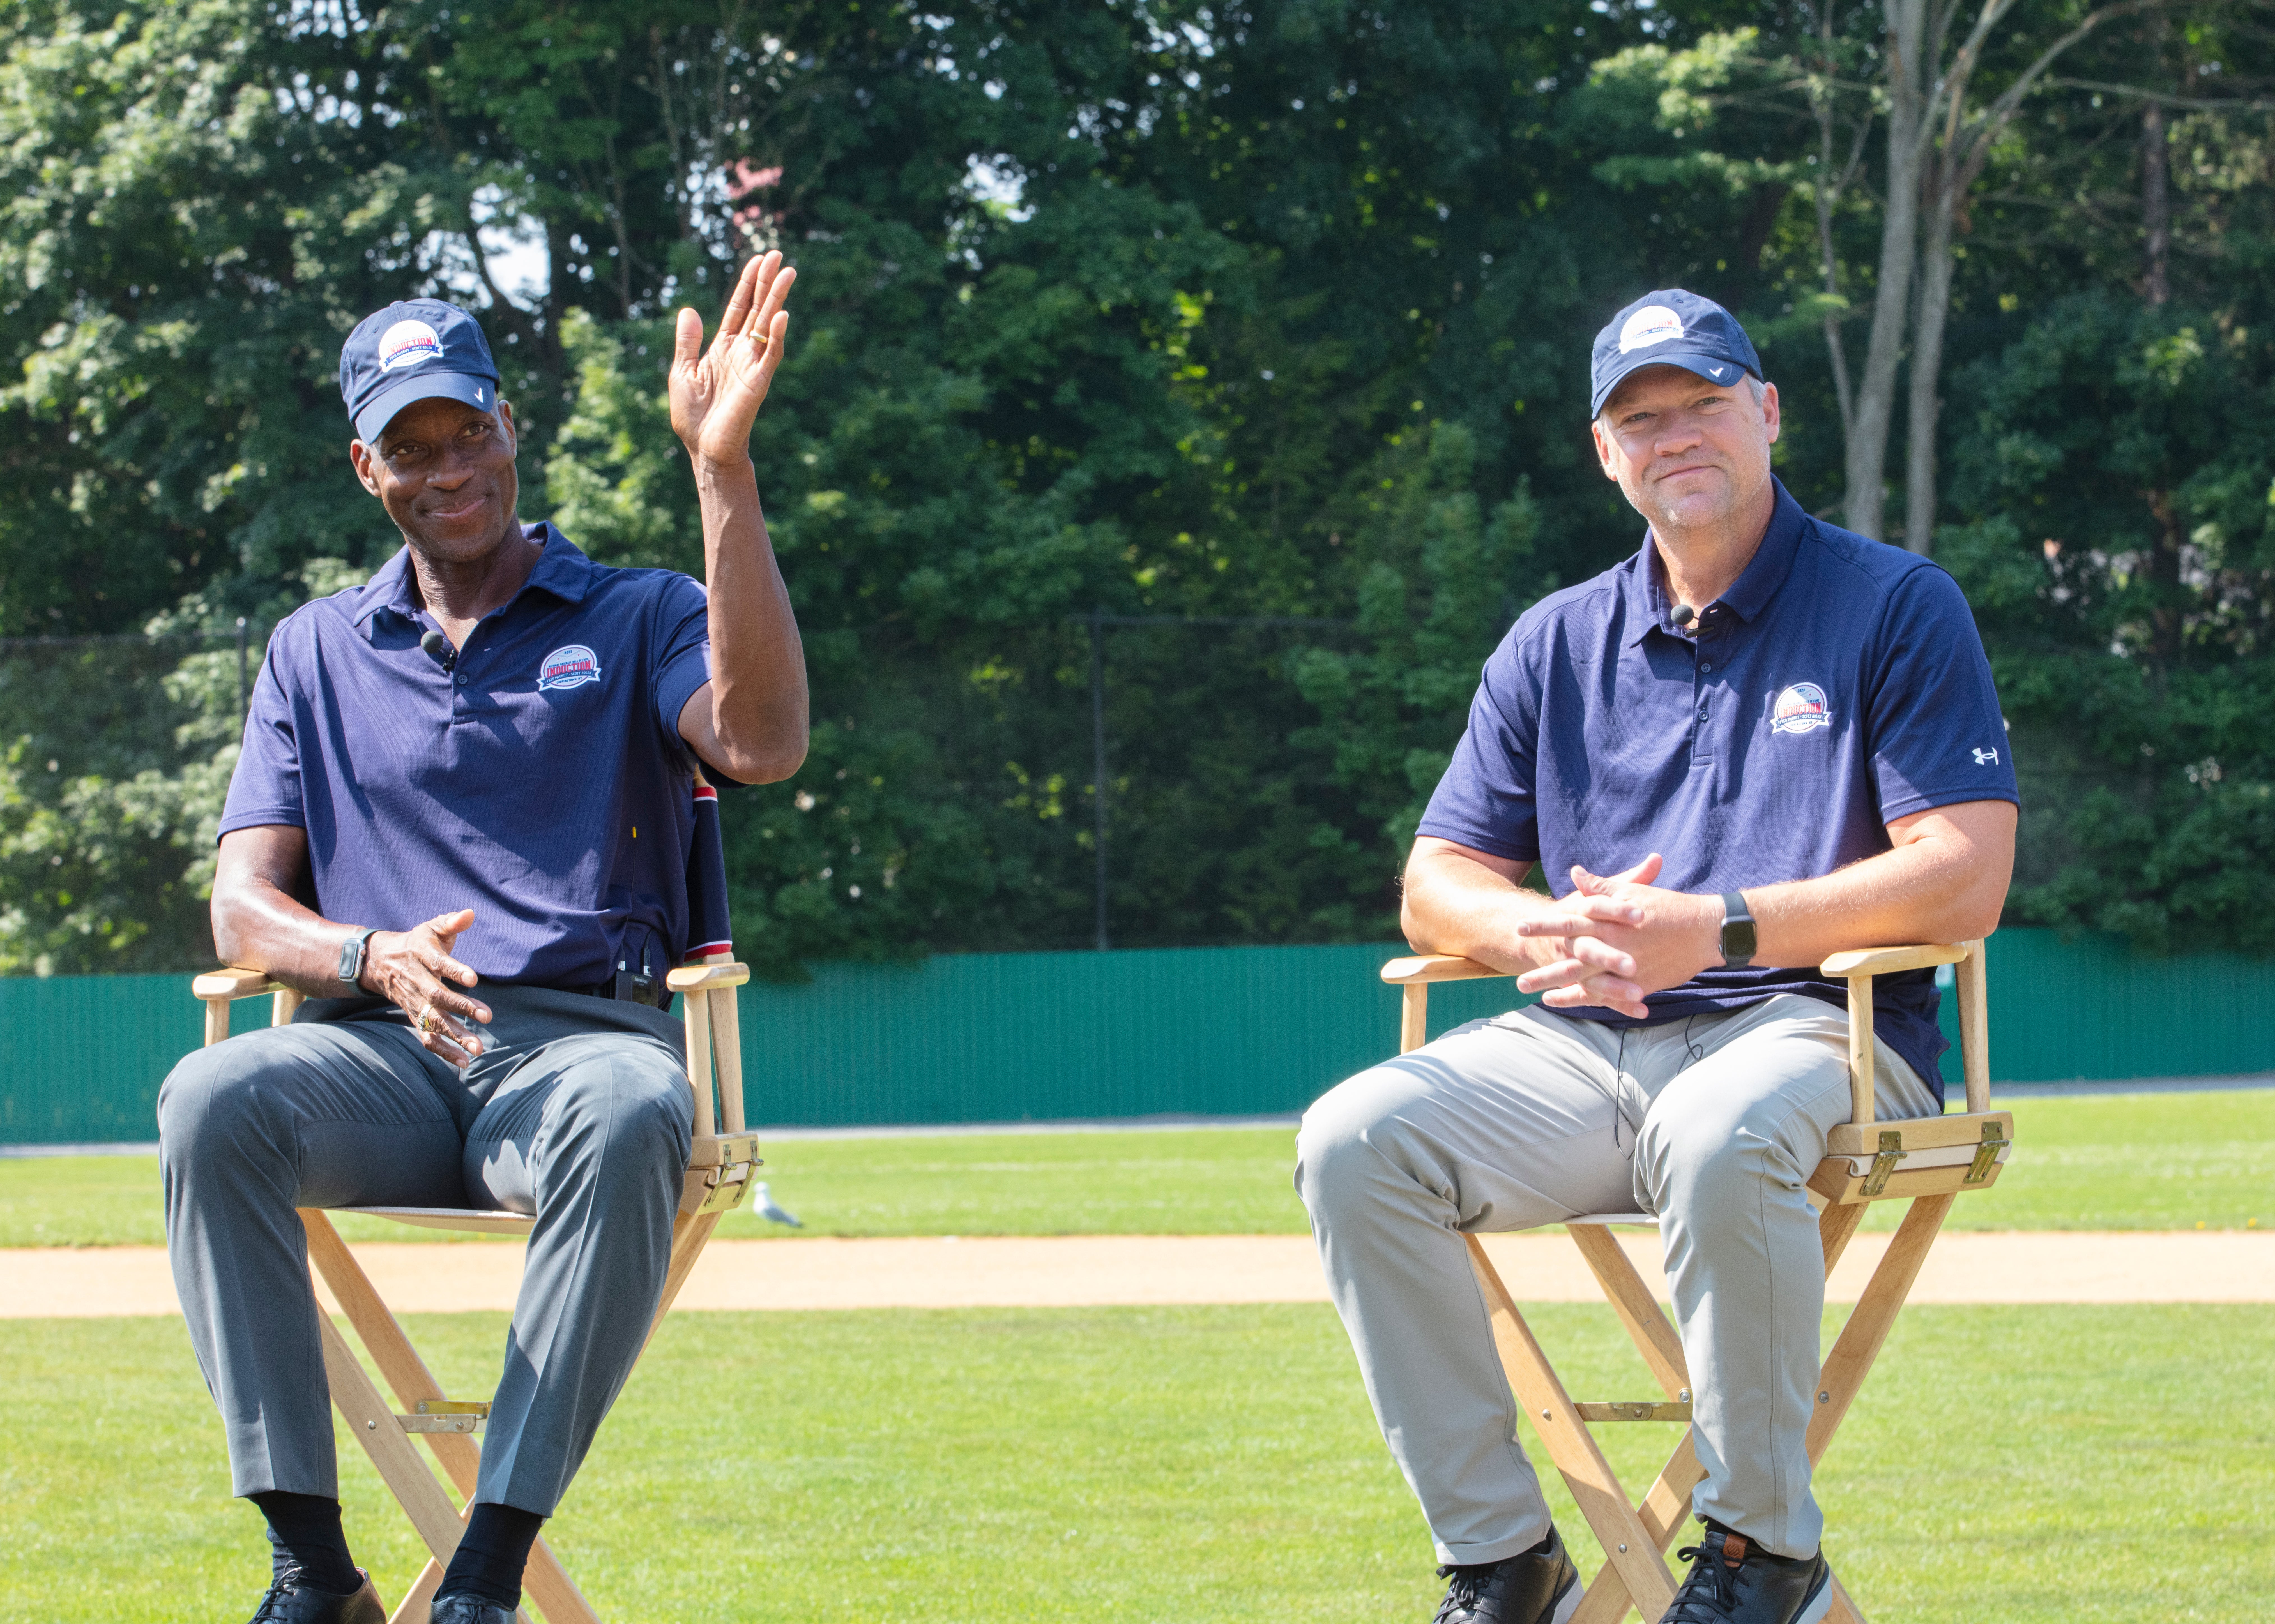 2023 Legends of the Game Roundtable with Fred McGriff and Scott Rolen